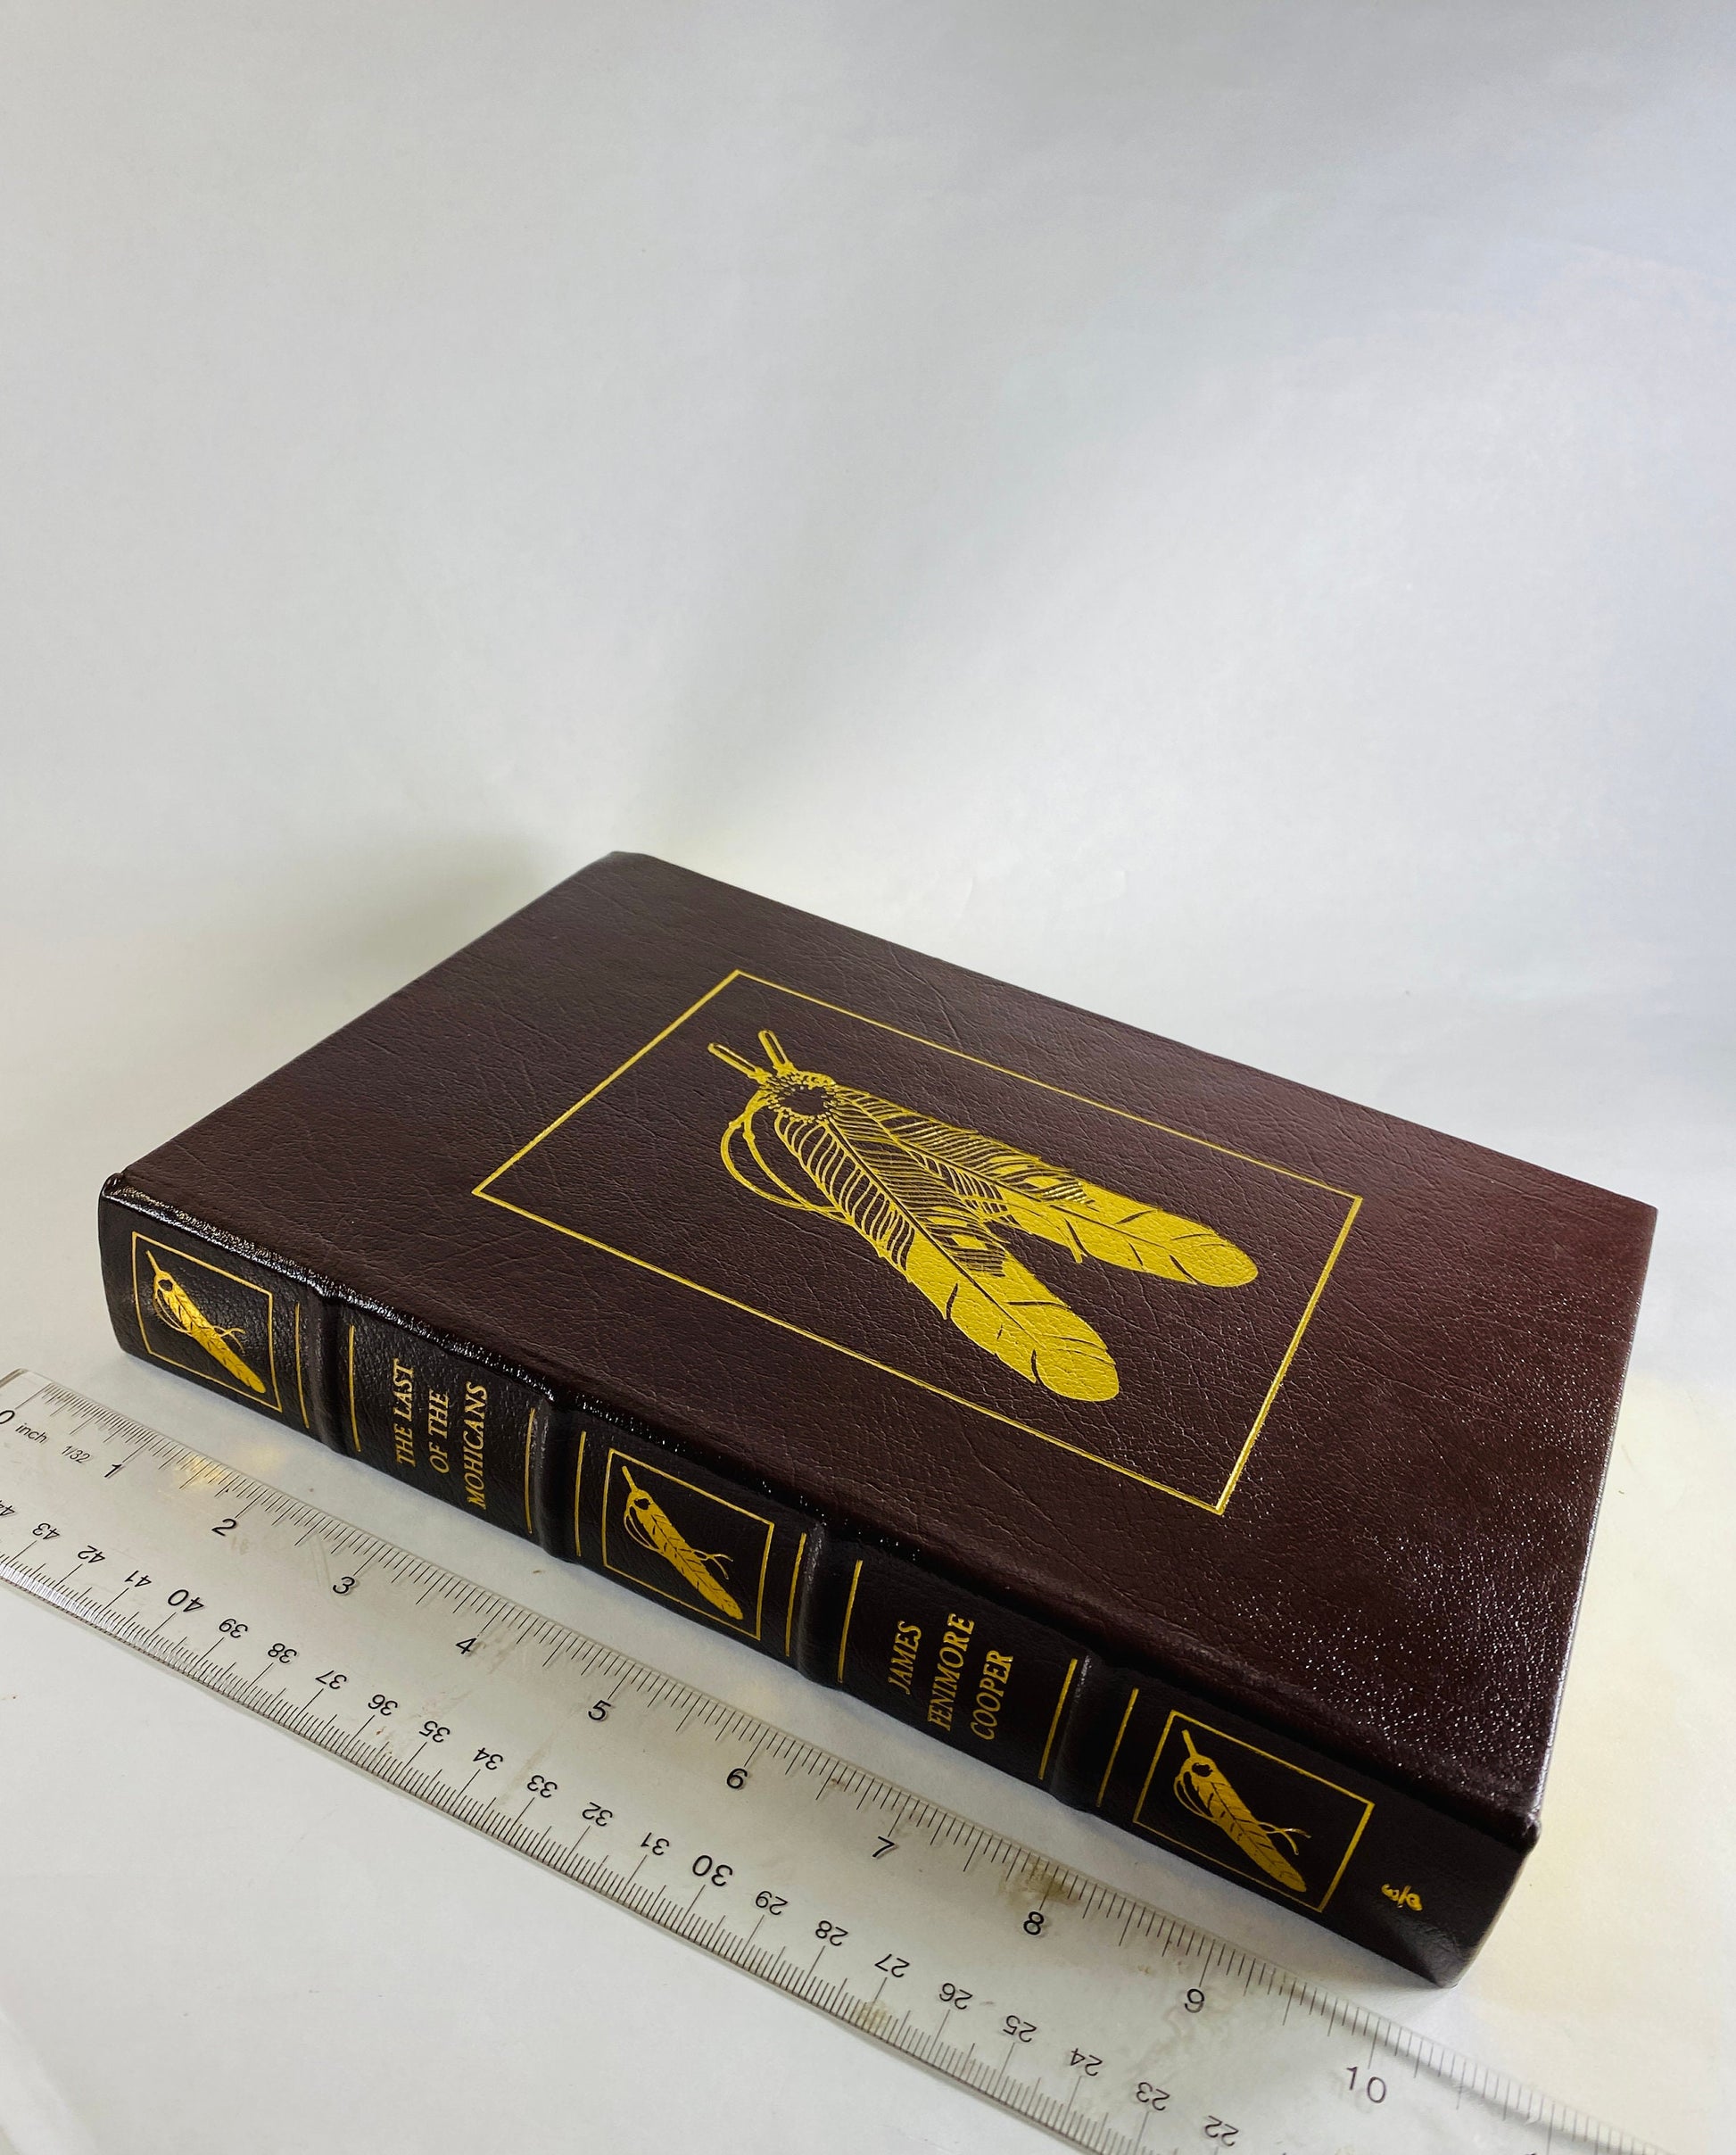 1978 Last of the Mohicans GORGEOUS Vintage Easton Press brown leather book by James Fenimore Cooper gold embossing French and Indian War